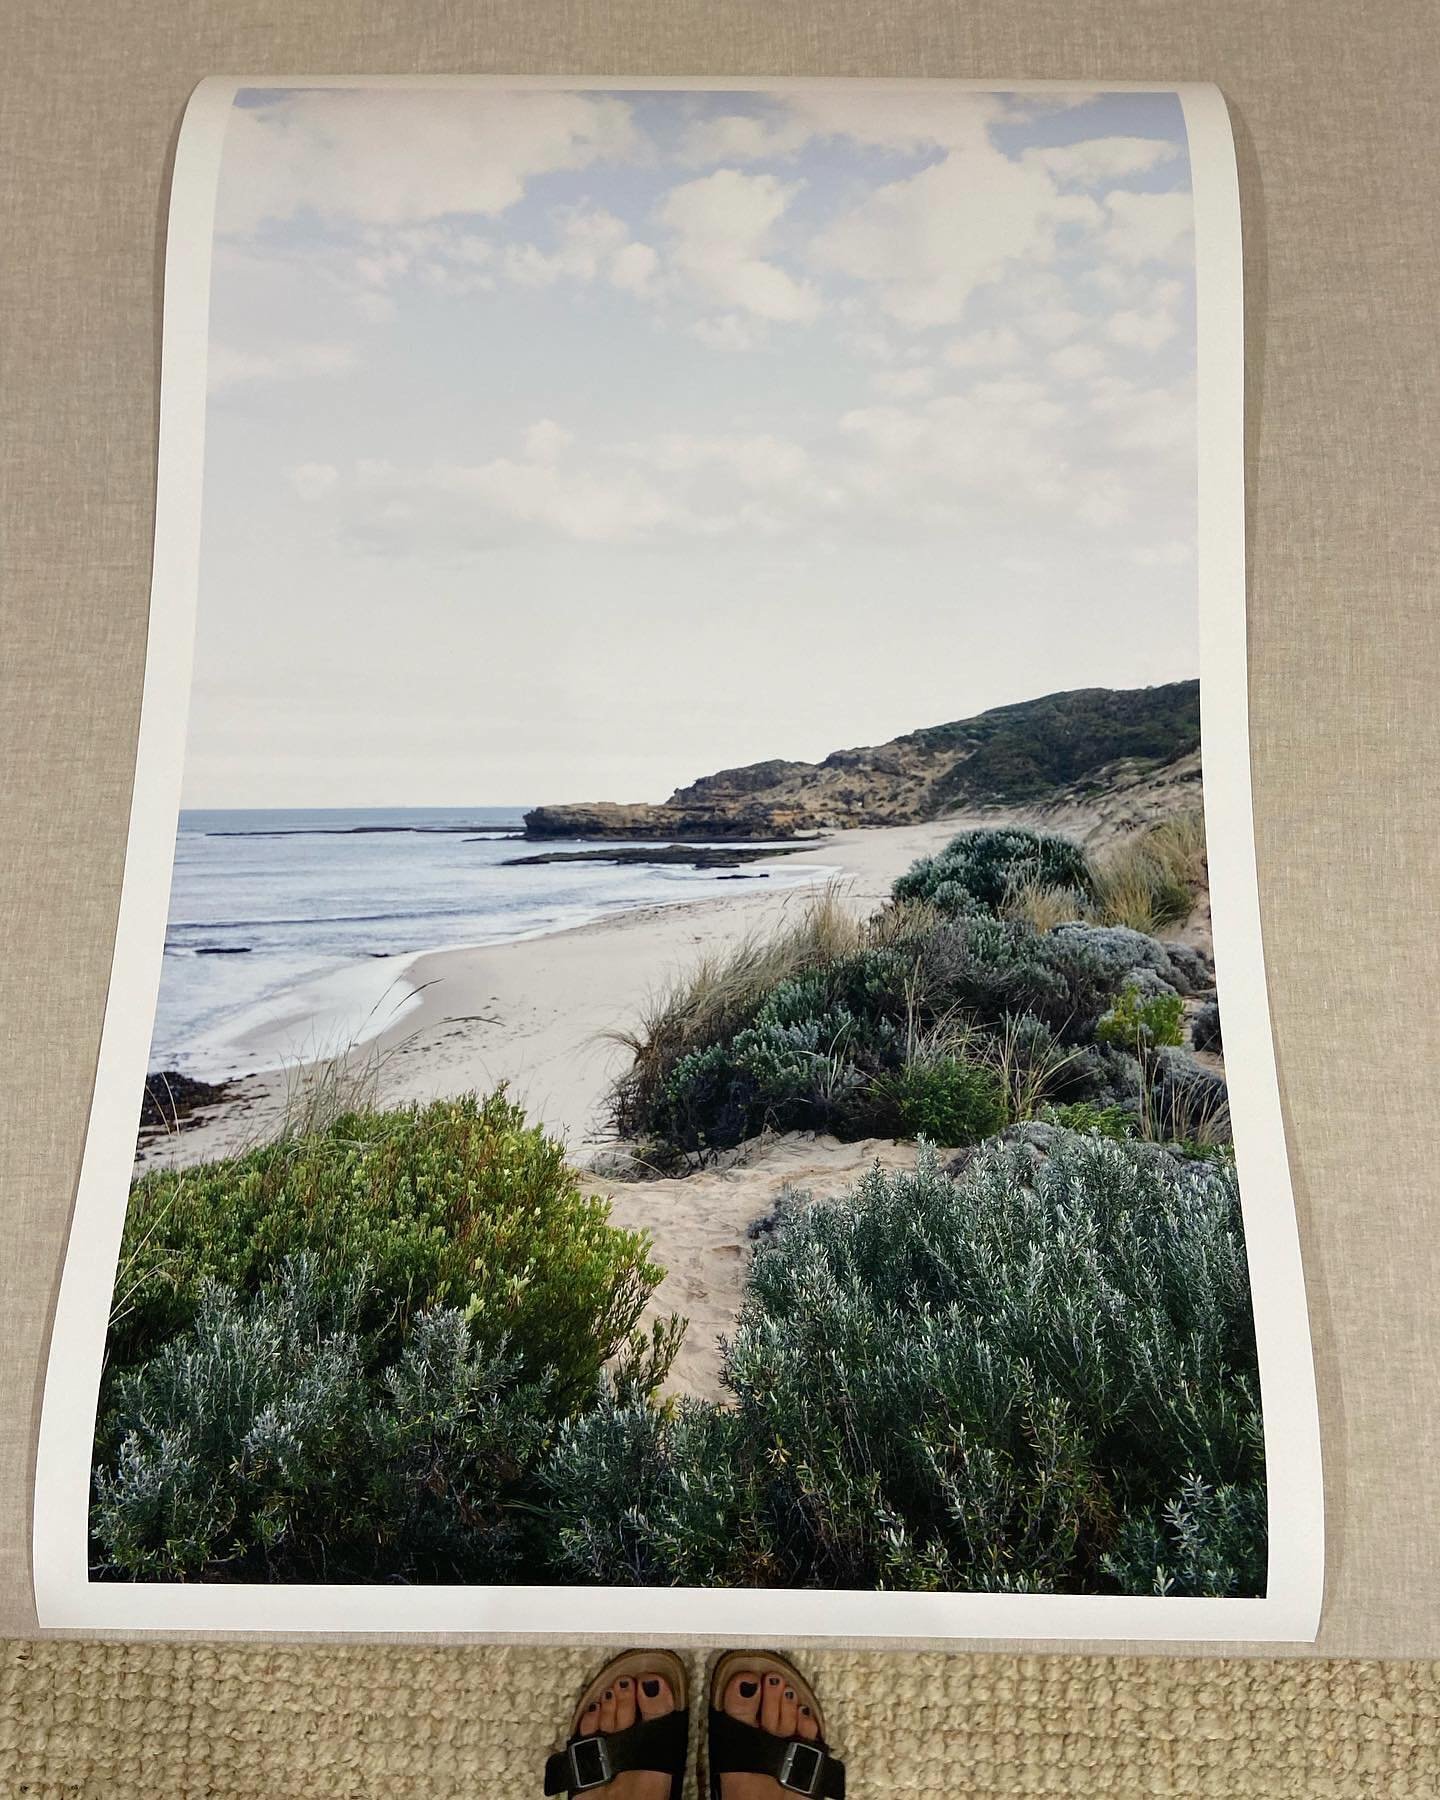 ✈️ Free shipping on all international orders until the end of May ✈️
.
.
Are you an Aussie expat missing home, or maybe you live overseas and have a favourite holiday destination in Australia? Shop any print now and receive free shipping on all inter